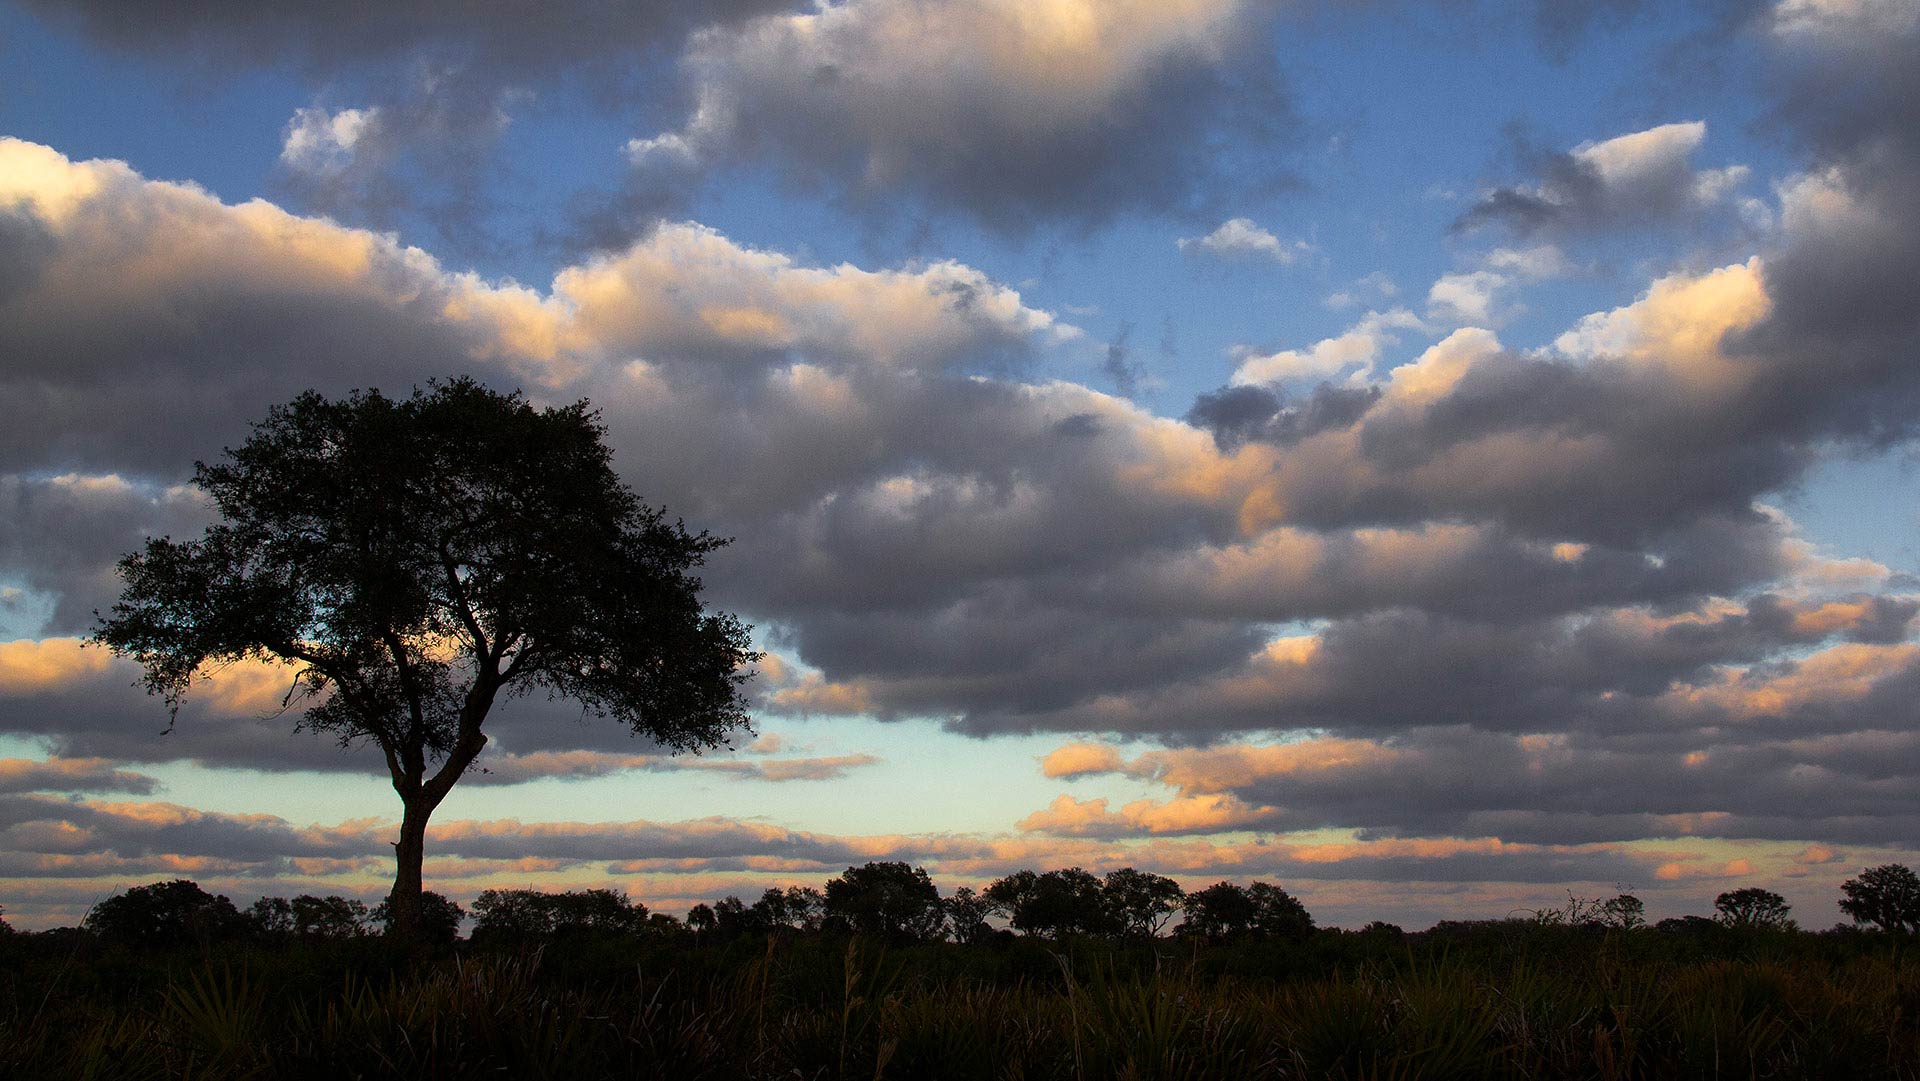 Tree and Evening Clouds, Myakka River State Park